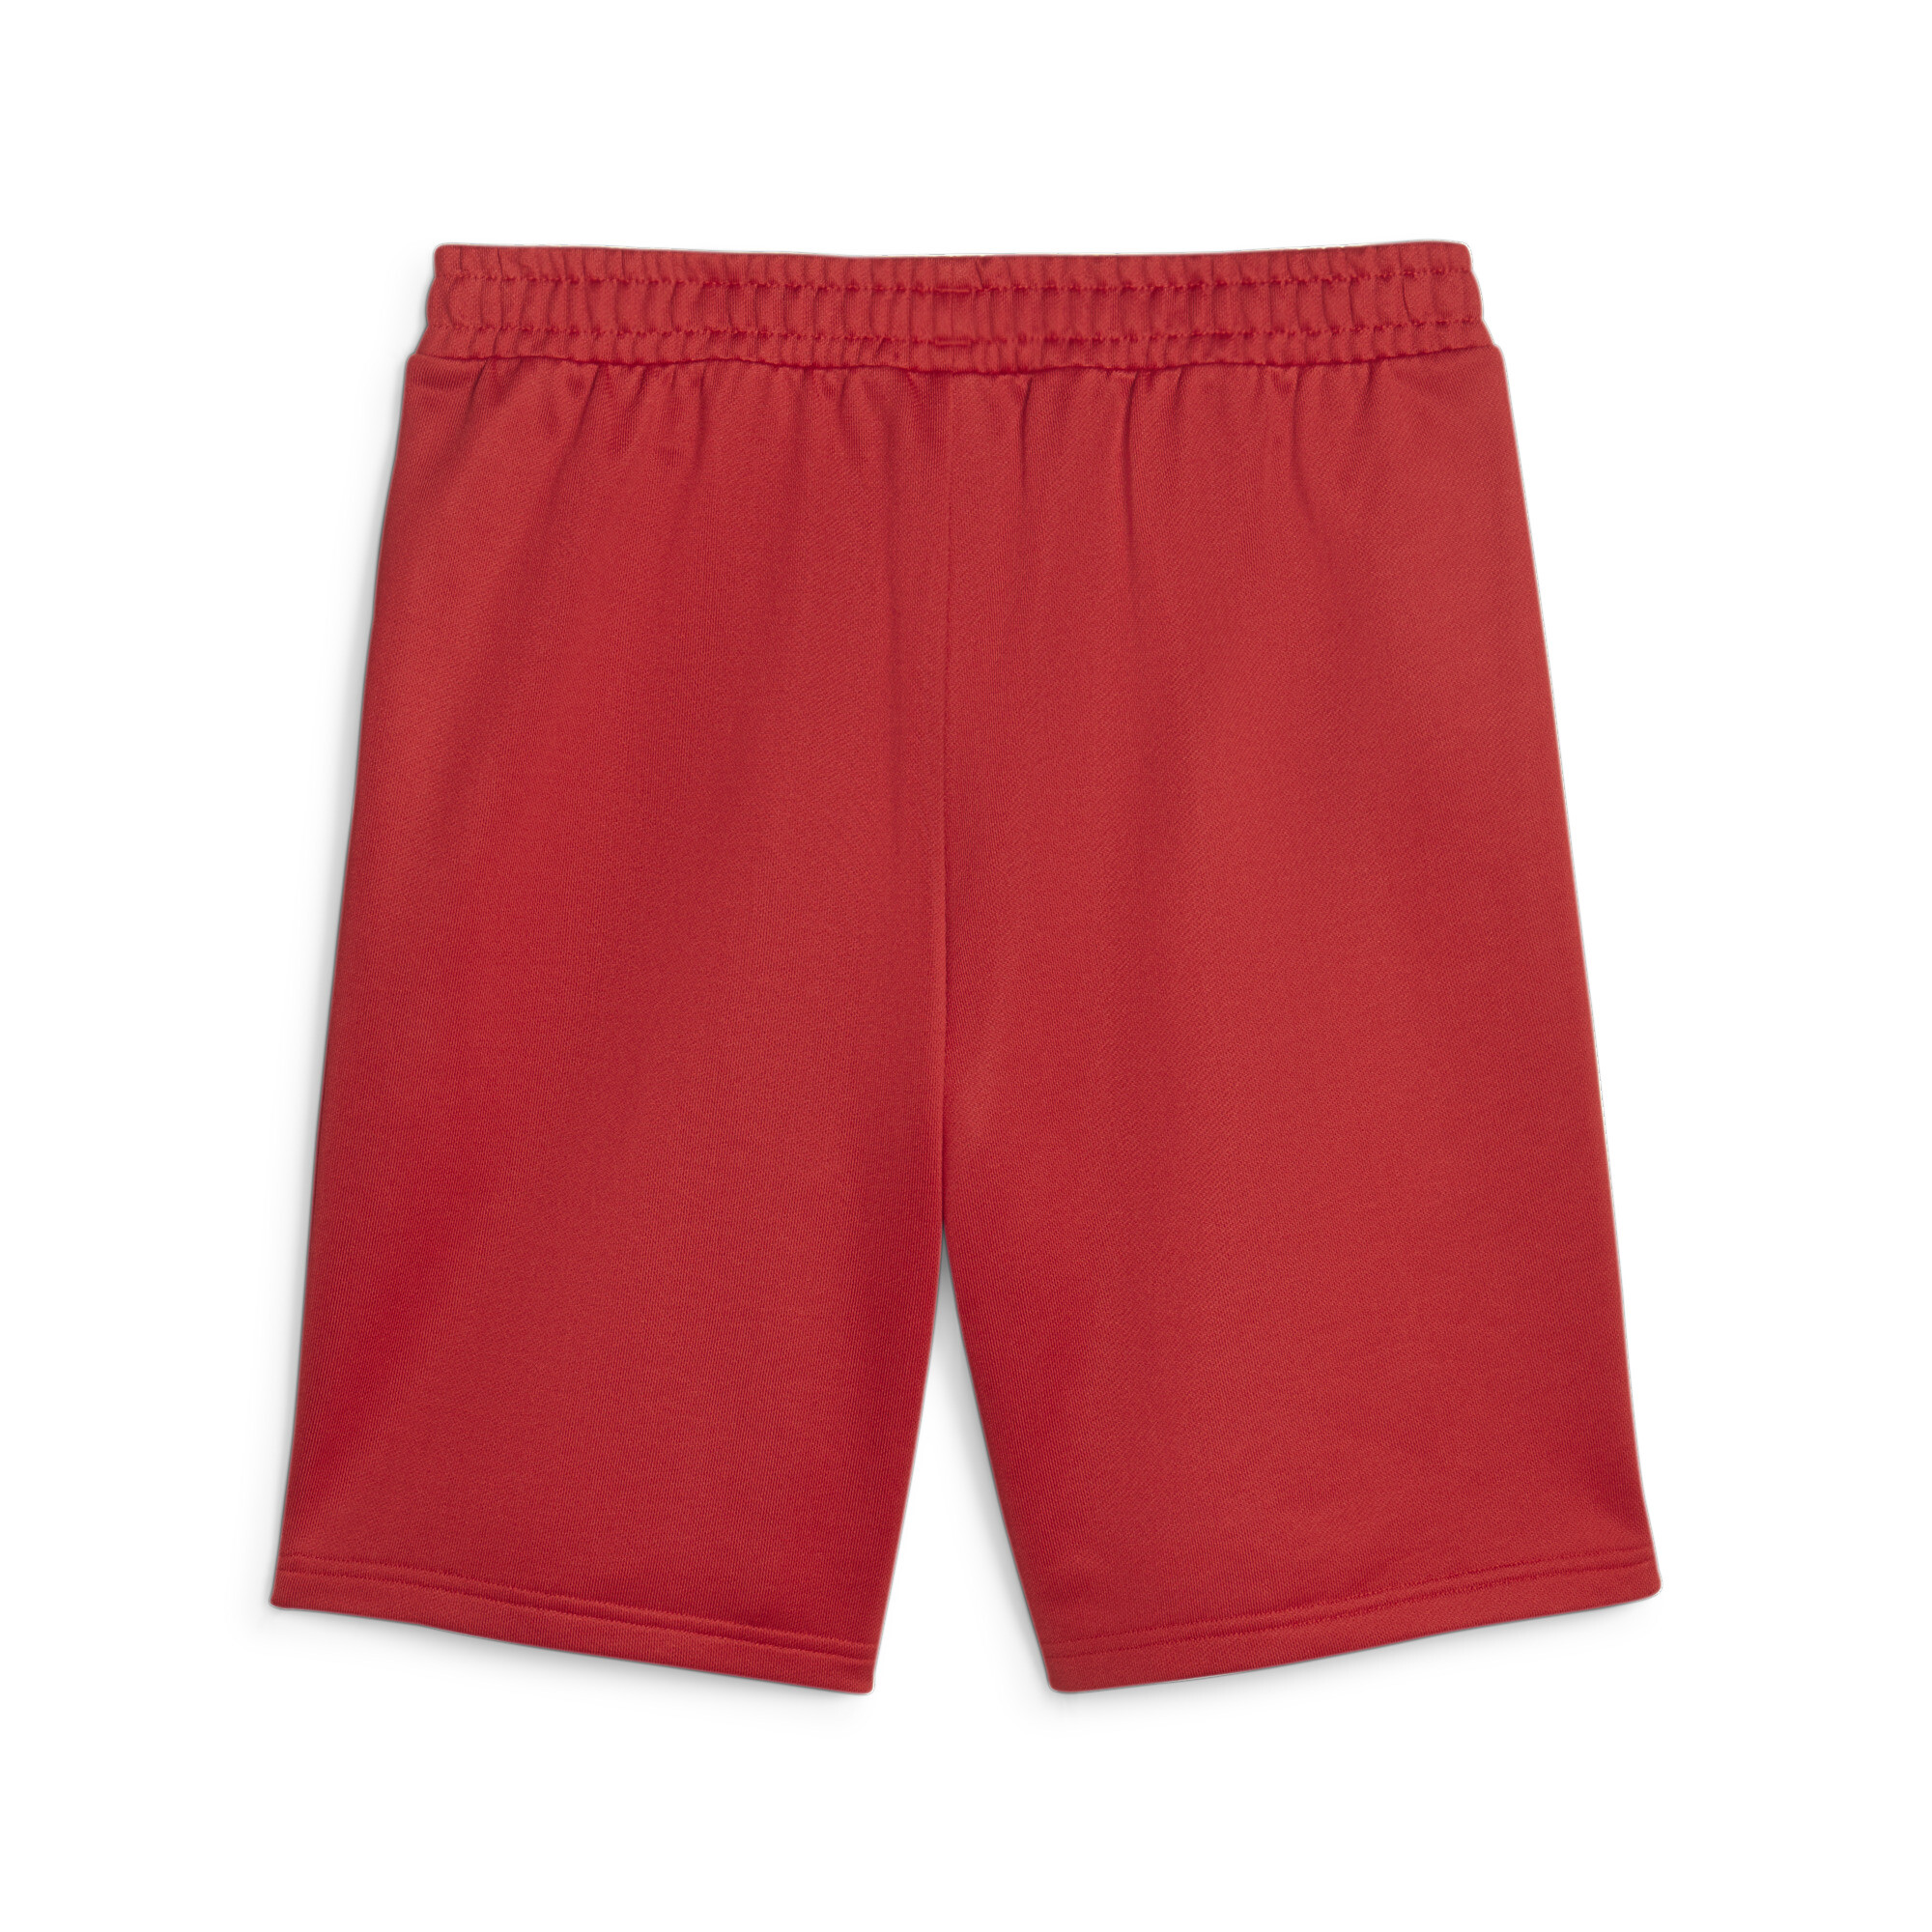 Men's Puma Morocco Ftbl Culture Shorts, Red, Size S, Clothing